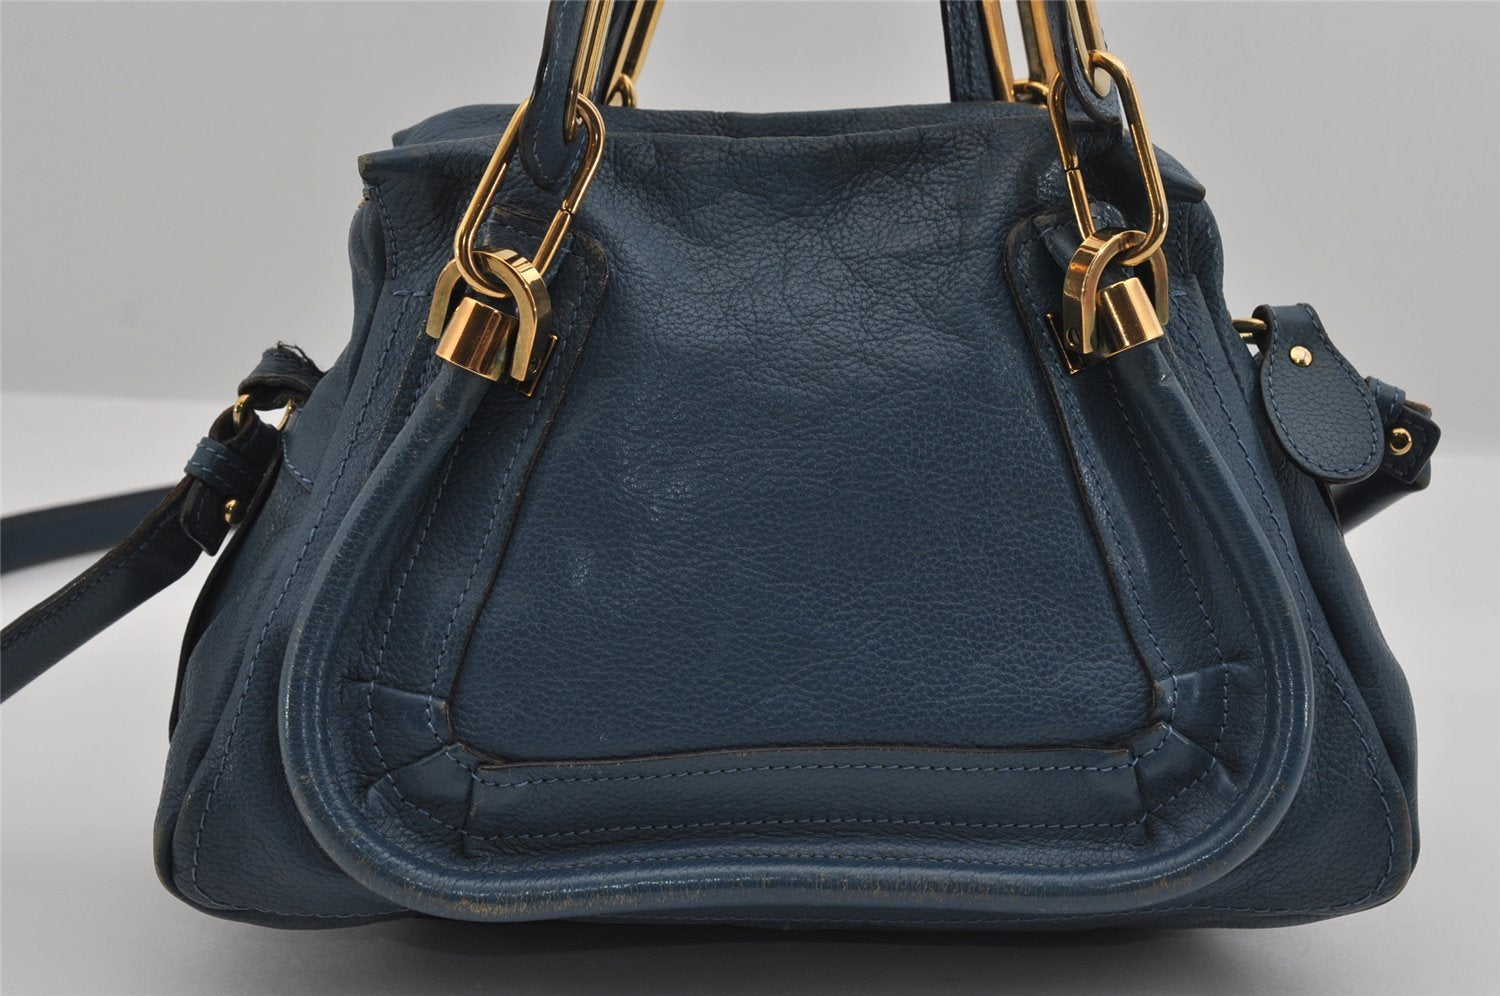 Authentic Chloe Paraty Small 2Way Shoulder Hand Bag Purse Leather Blue 2177I